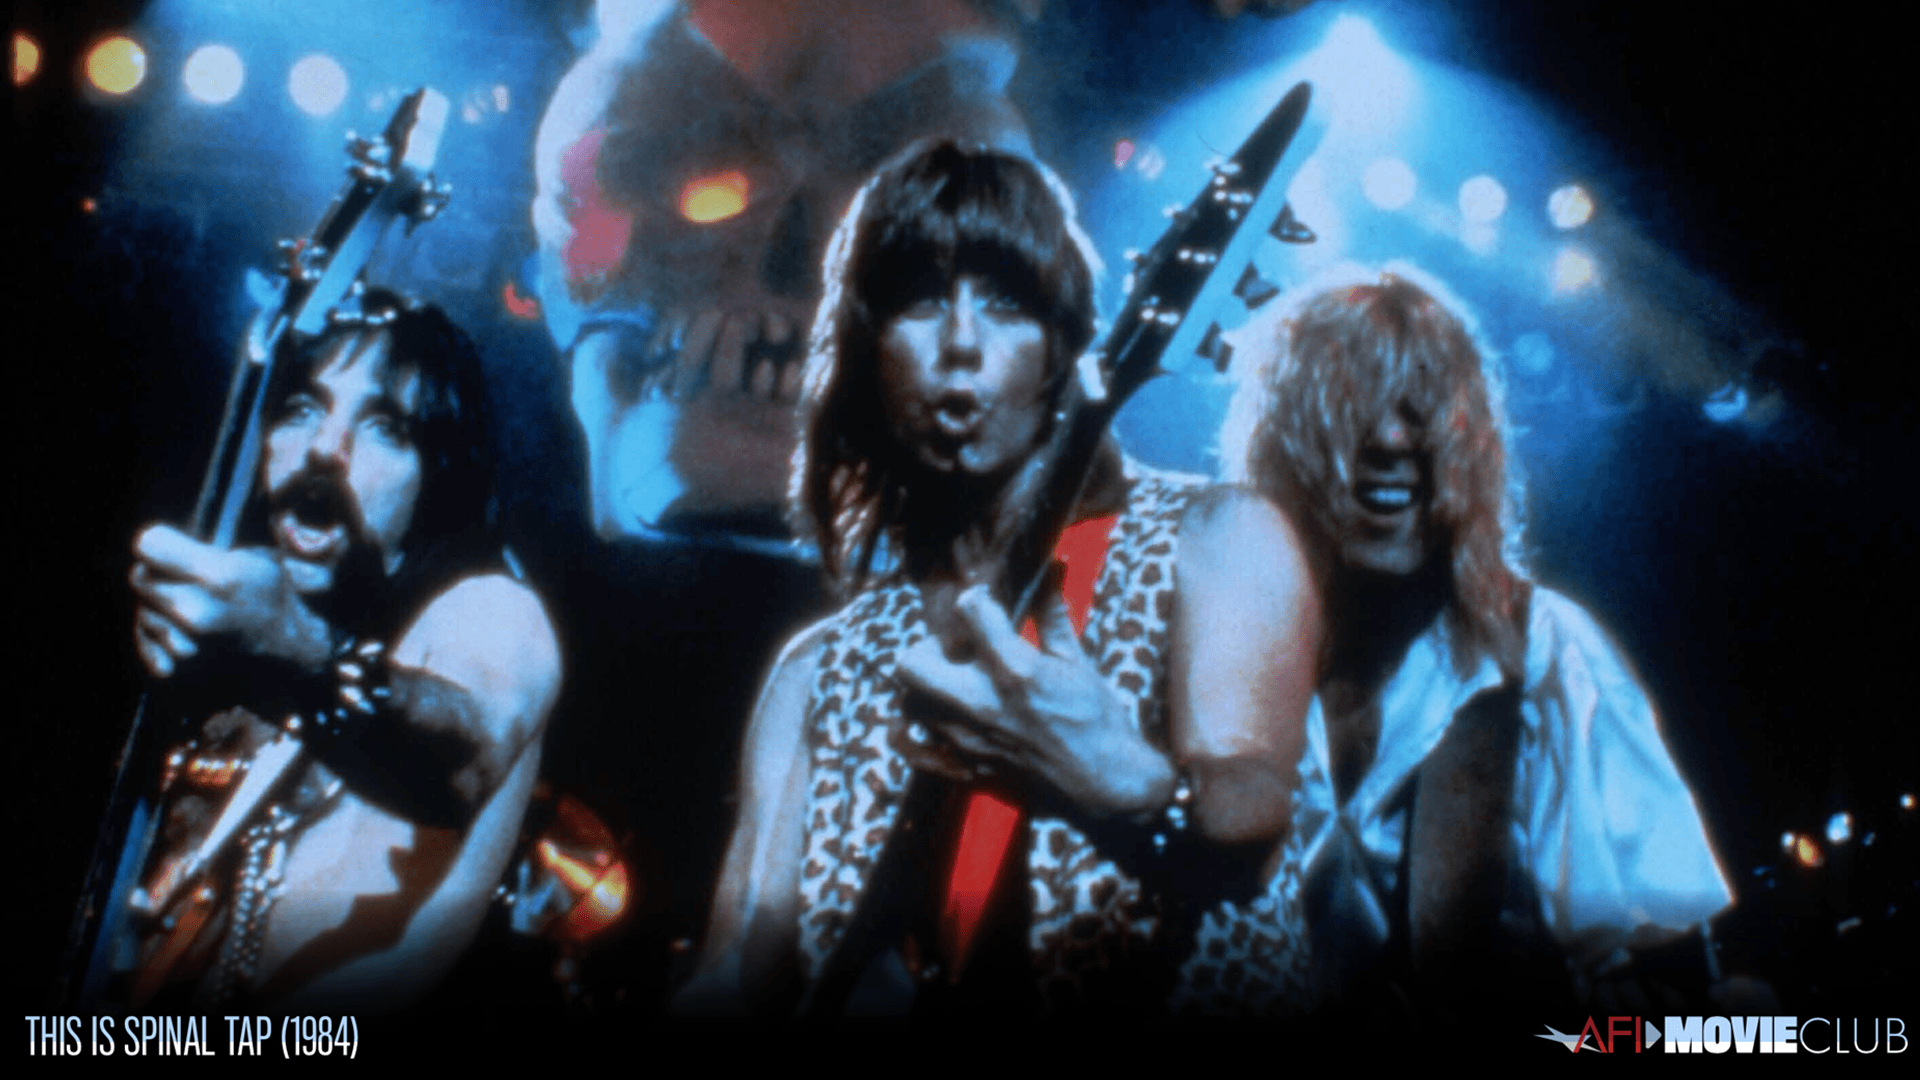 This is Spinal Tap Film Still - Christopher Guest, Michael McKean, Harry Shearer, and Spinal Tap